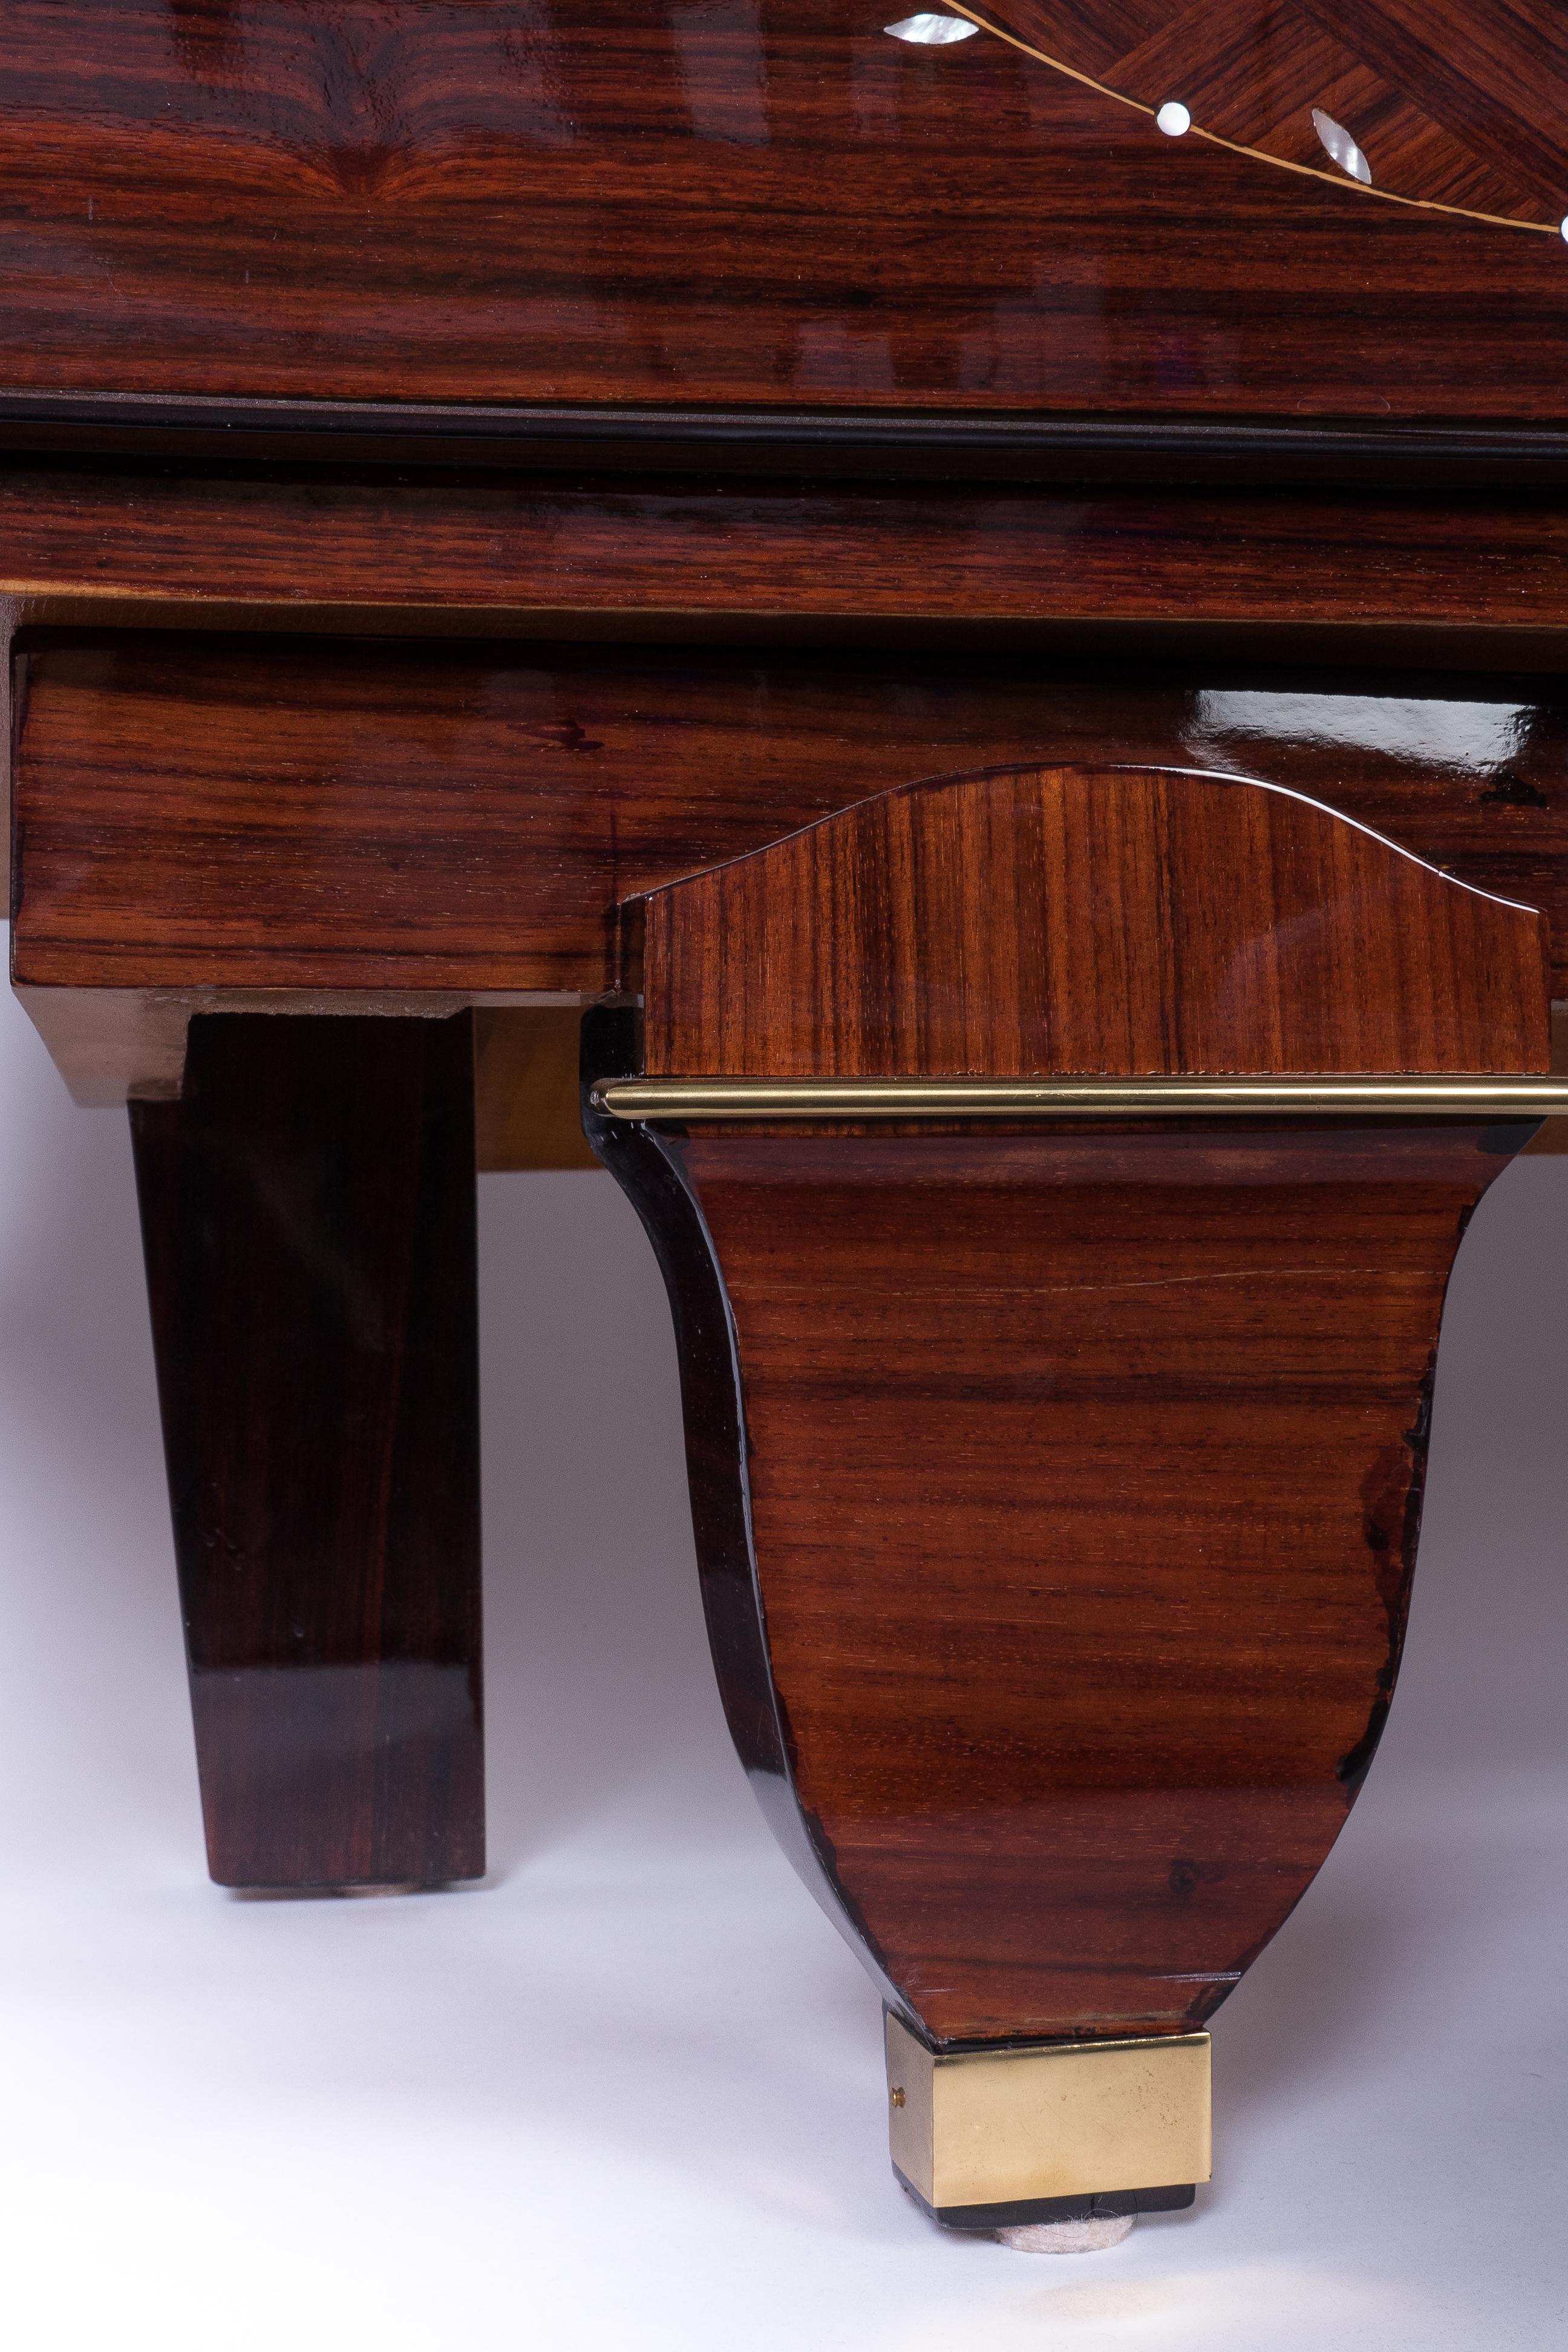 Exquisite French Art Deco Sideboard Credenza in Rosewood by Jules Leleu 1